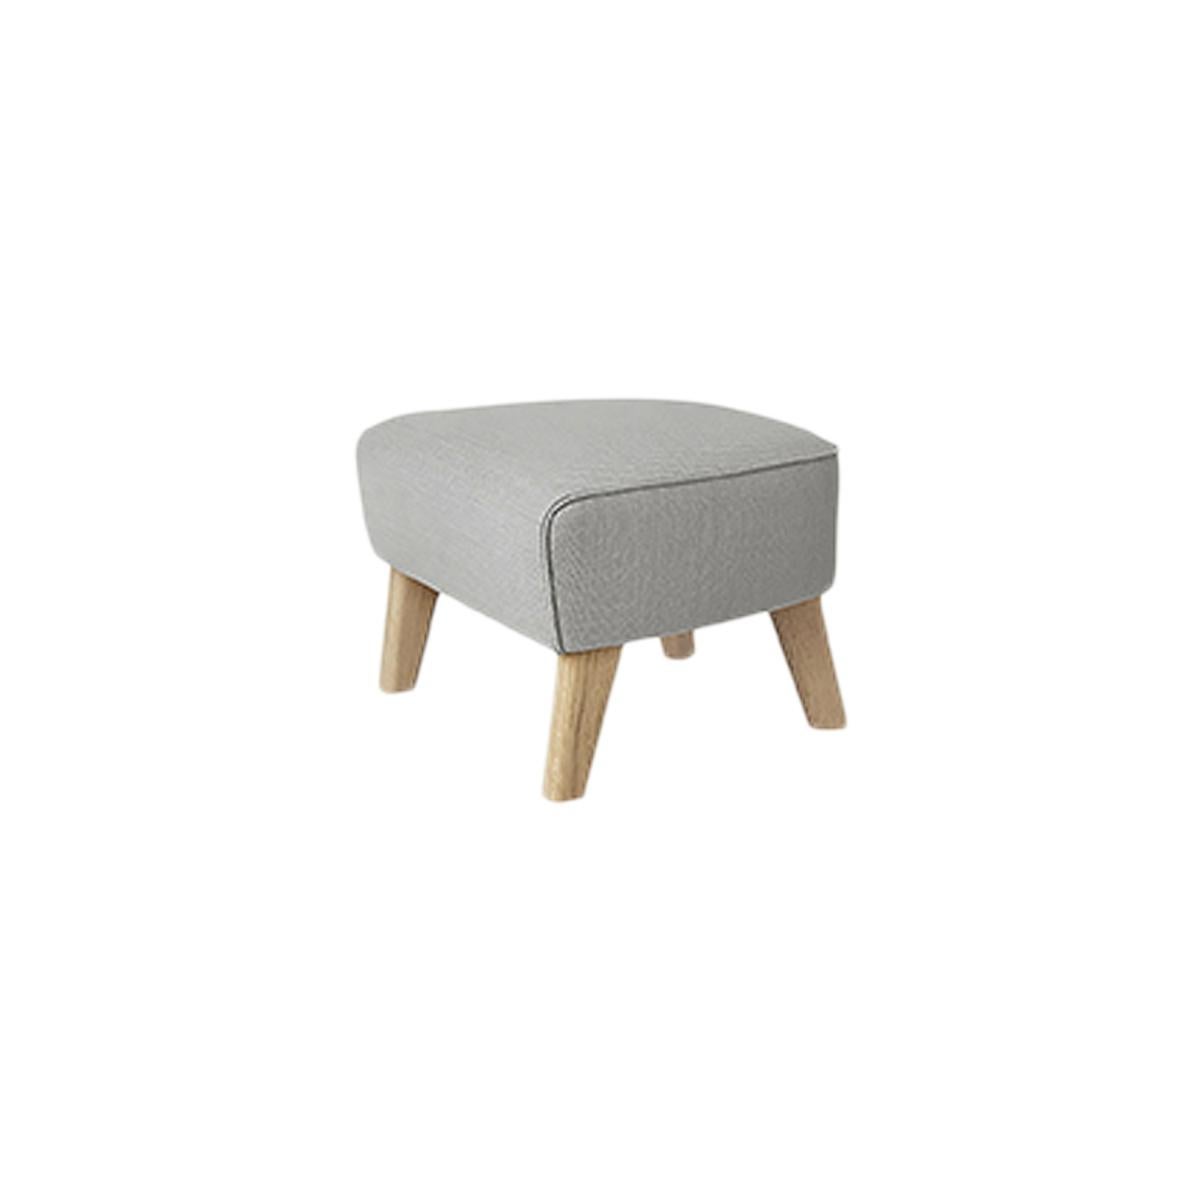 Light grey and natural oak raf simons vidar 3 my own chair footstool by Lassen
Dimensions: W 56 x D 58 x H 40 cm 
Materials: Textile
Also available: Other colors available.

The my own chair footstool has been designed in the same spirit as